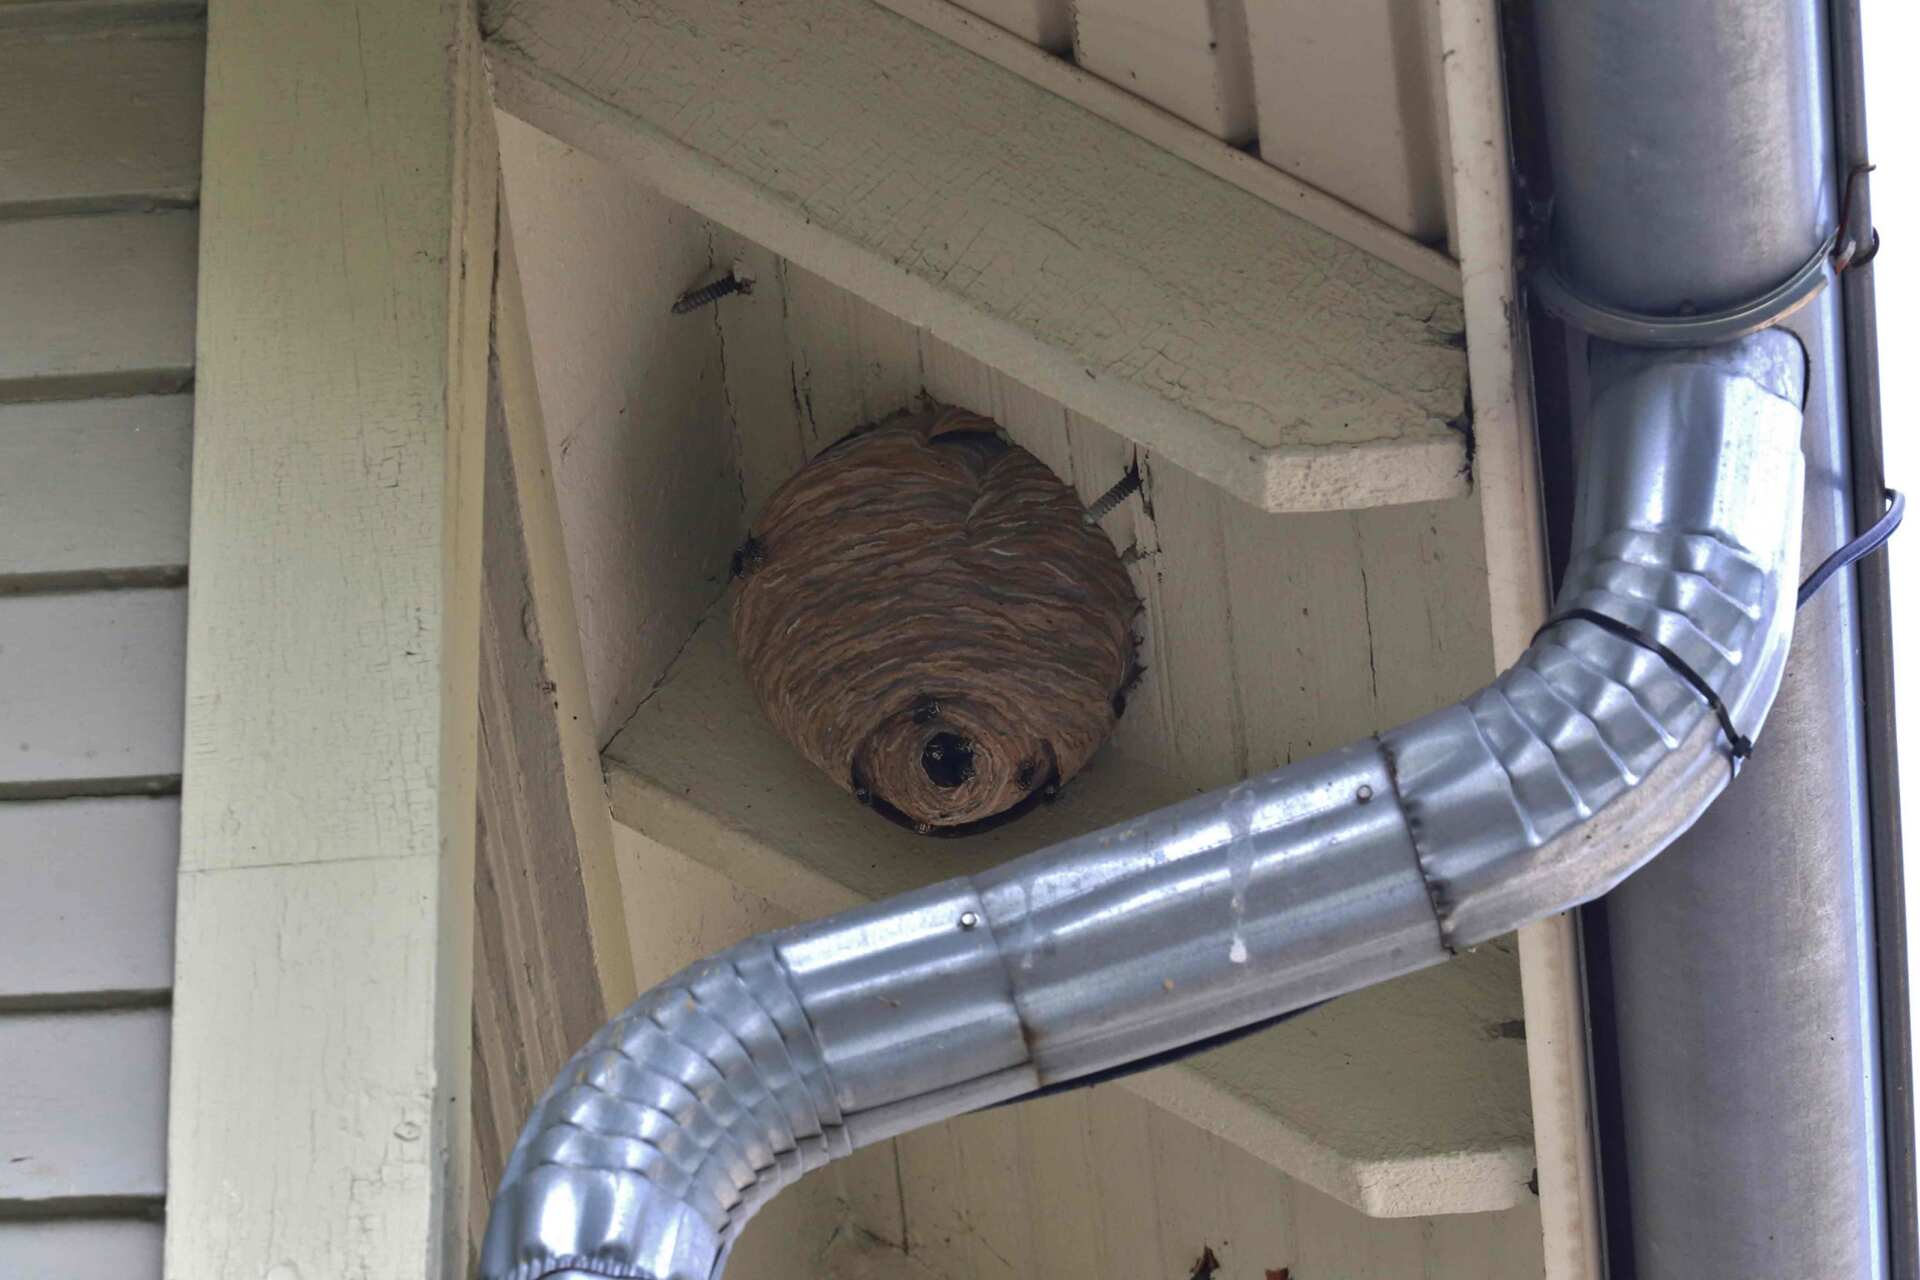 Residential House With A Common Wasp Hive - Warren, MI - Maple Lane Pest Control